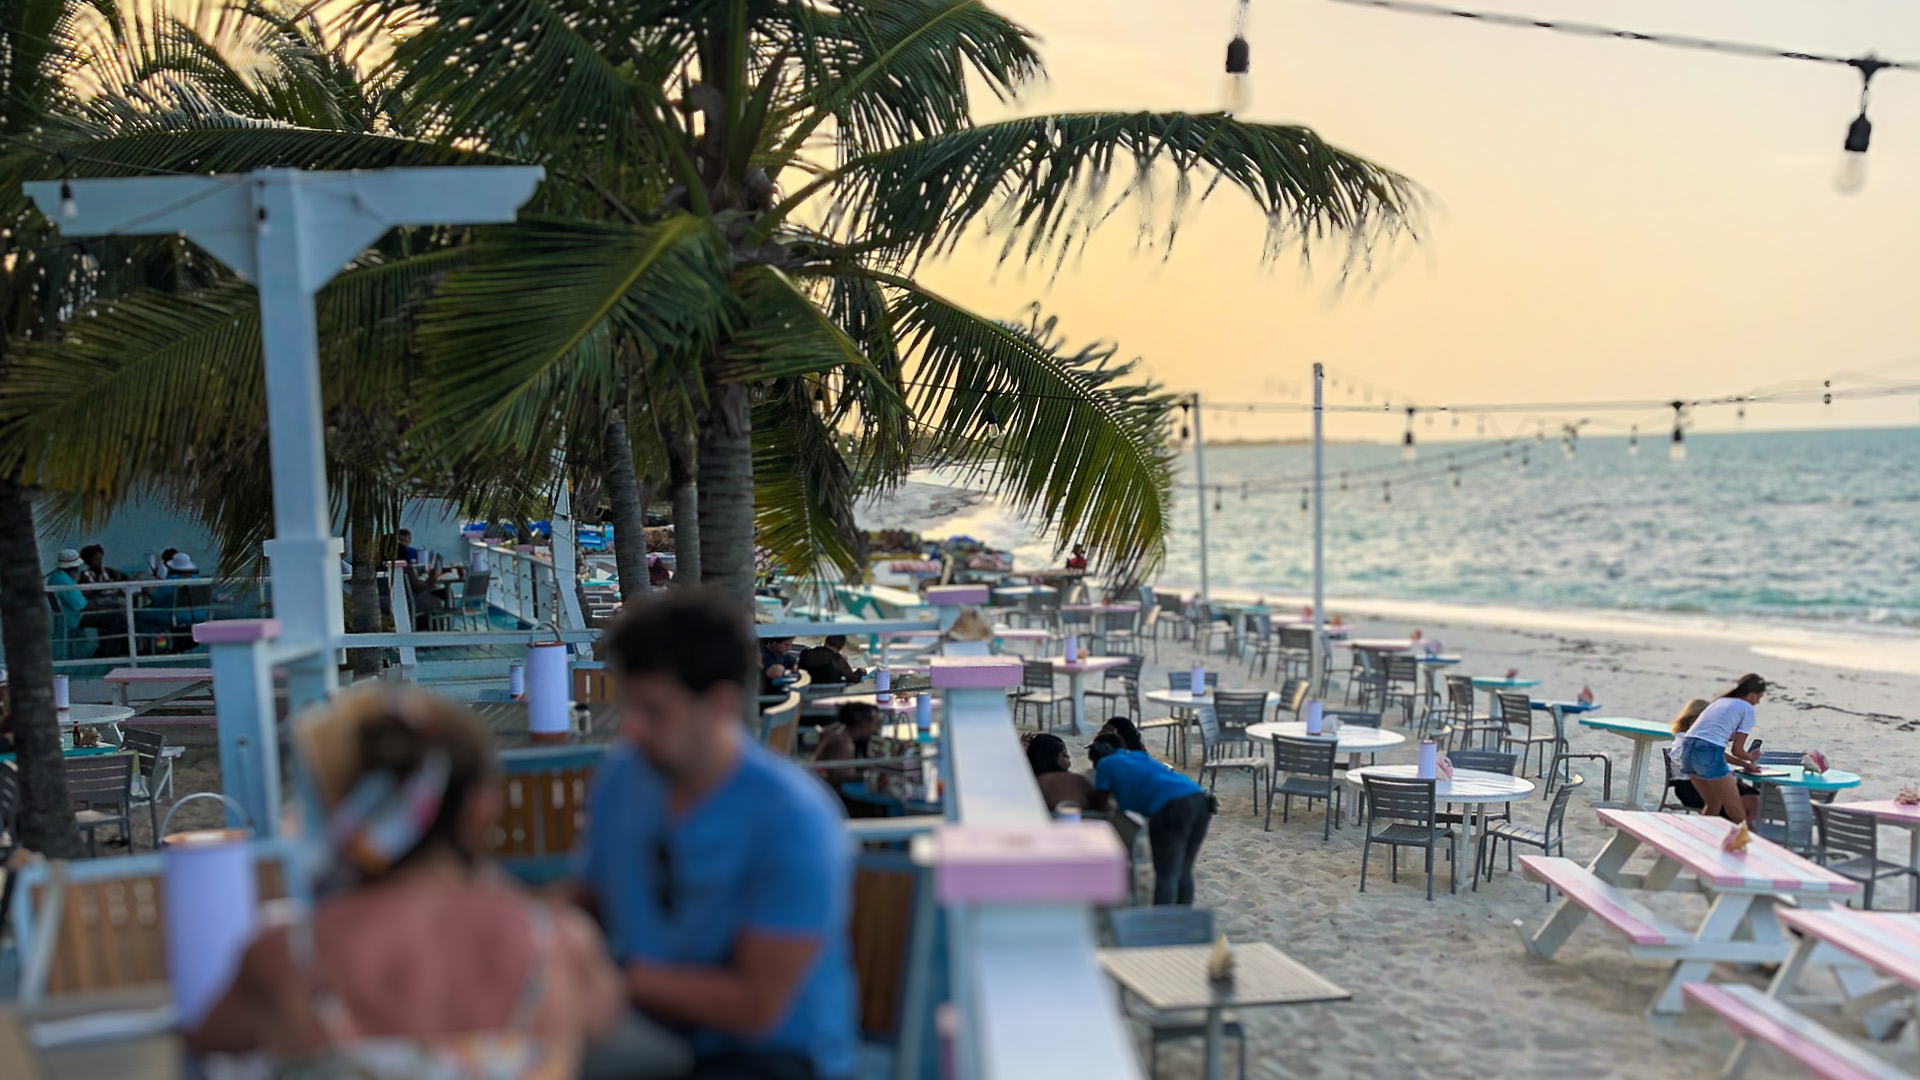 Beach front dining at Da Conch Shack